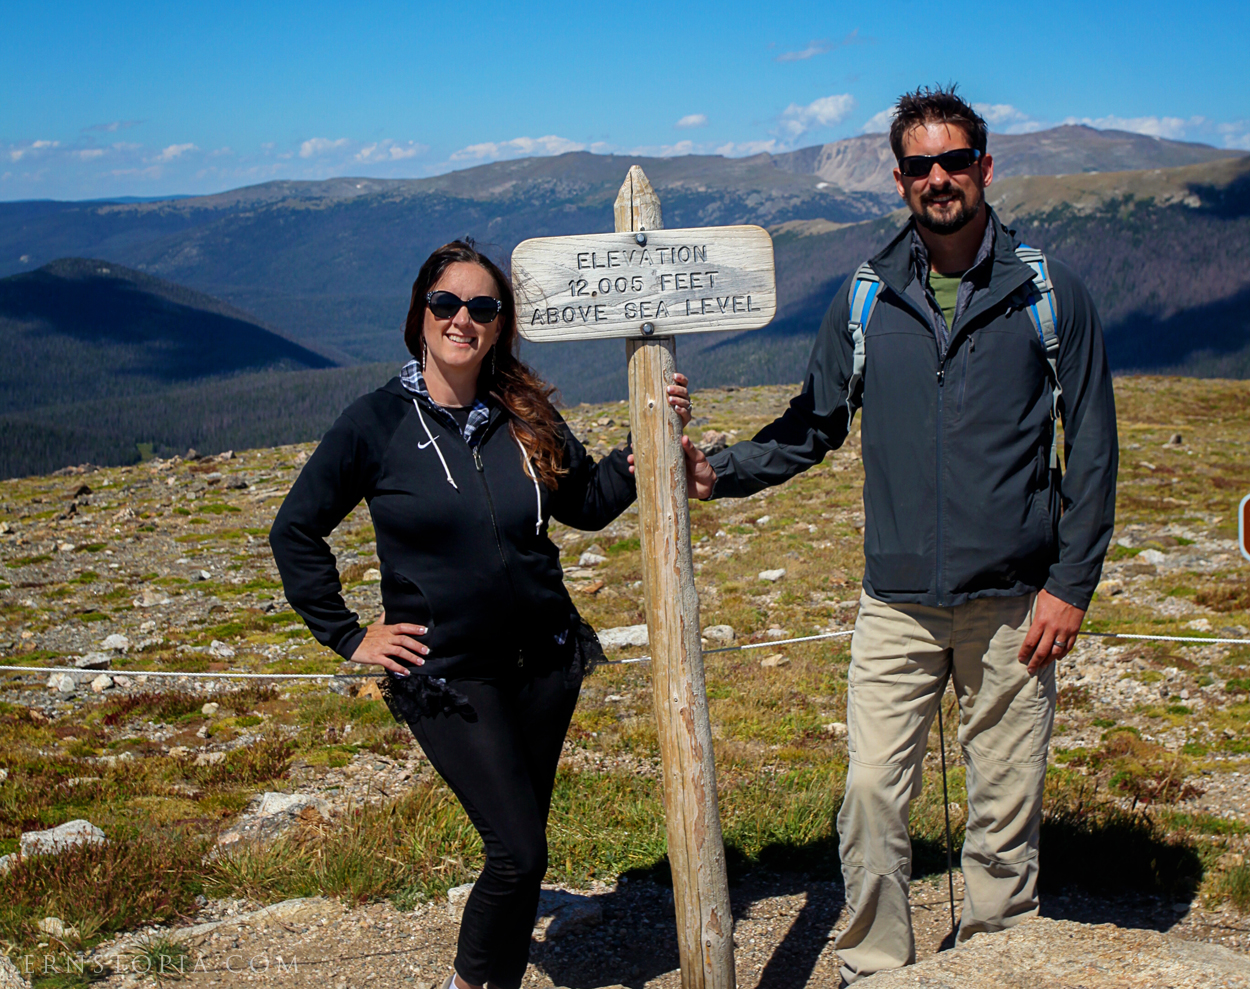 Standing at 12,005 feet above sea level at Rocky Mountain National Park